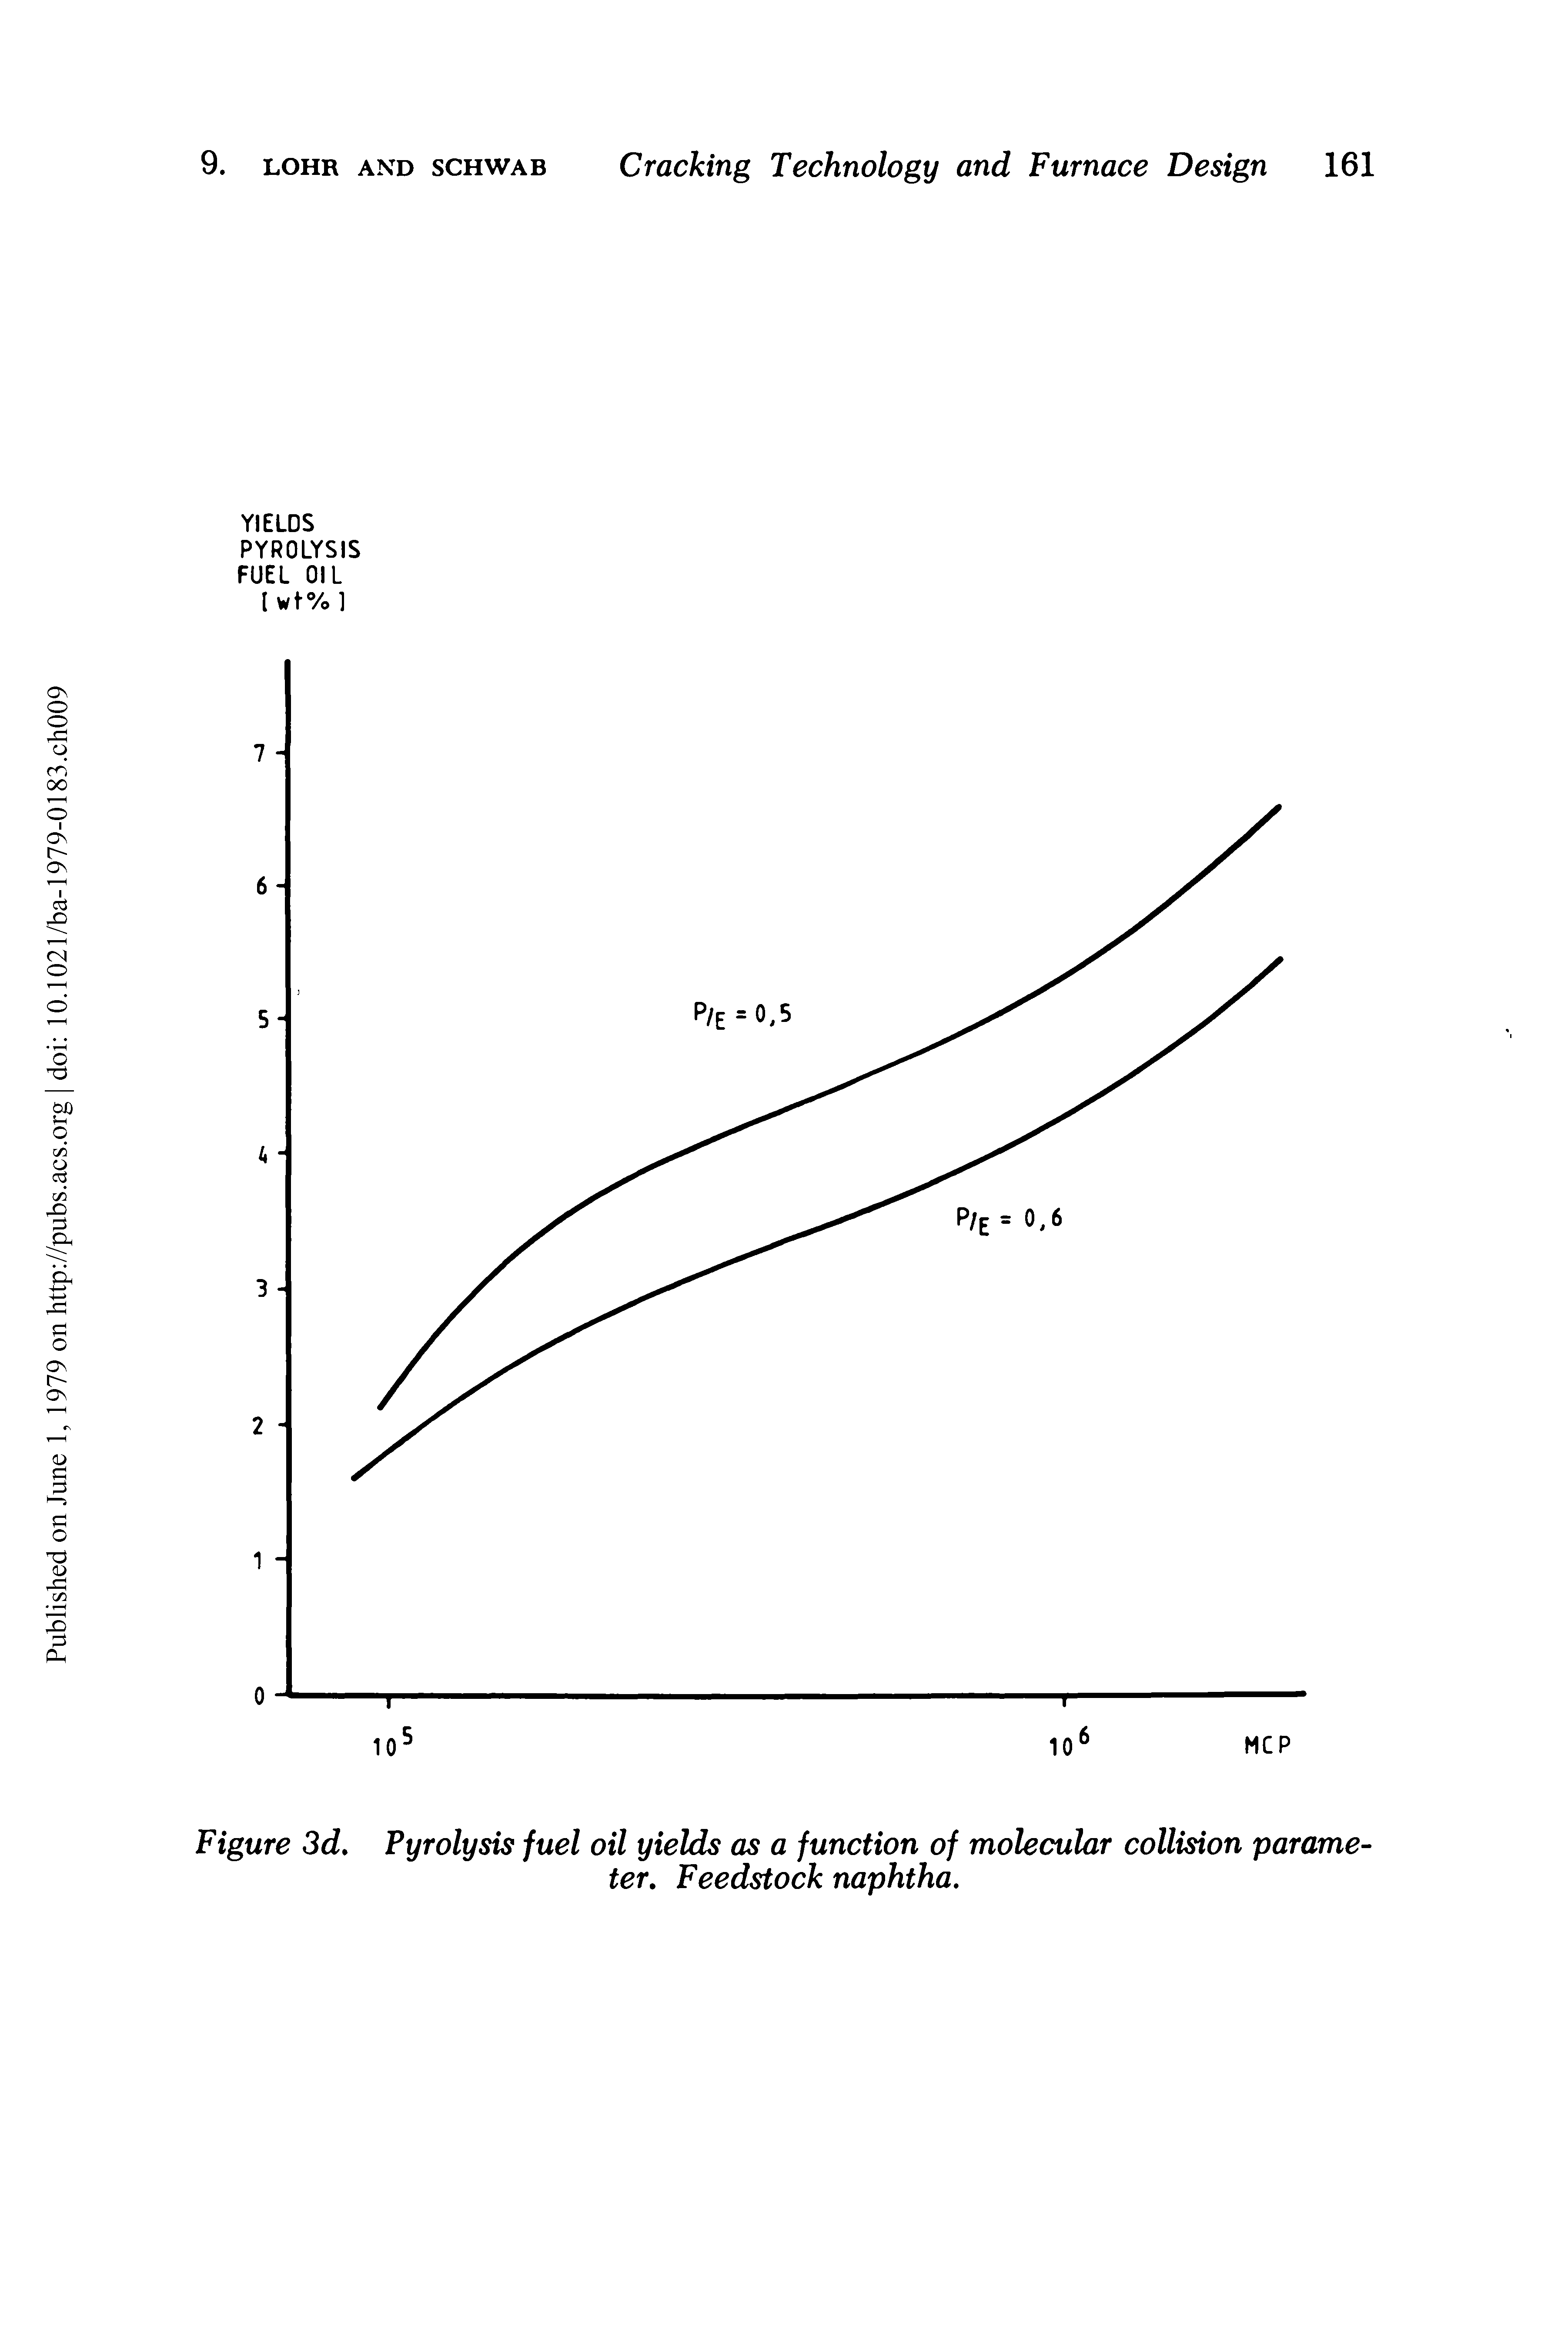 Figure 3d. Pyrolysis fuel oil yields as a function of molecular collision parameter. Feedstock naphtha.